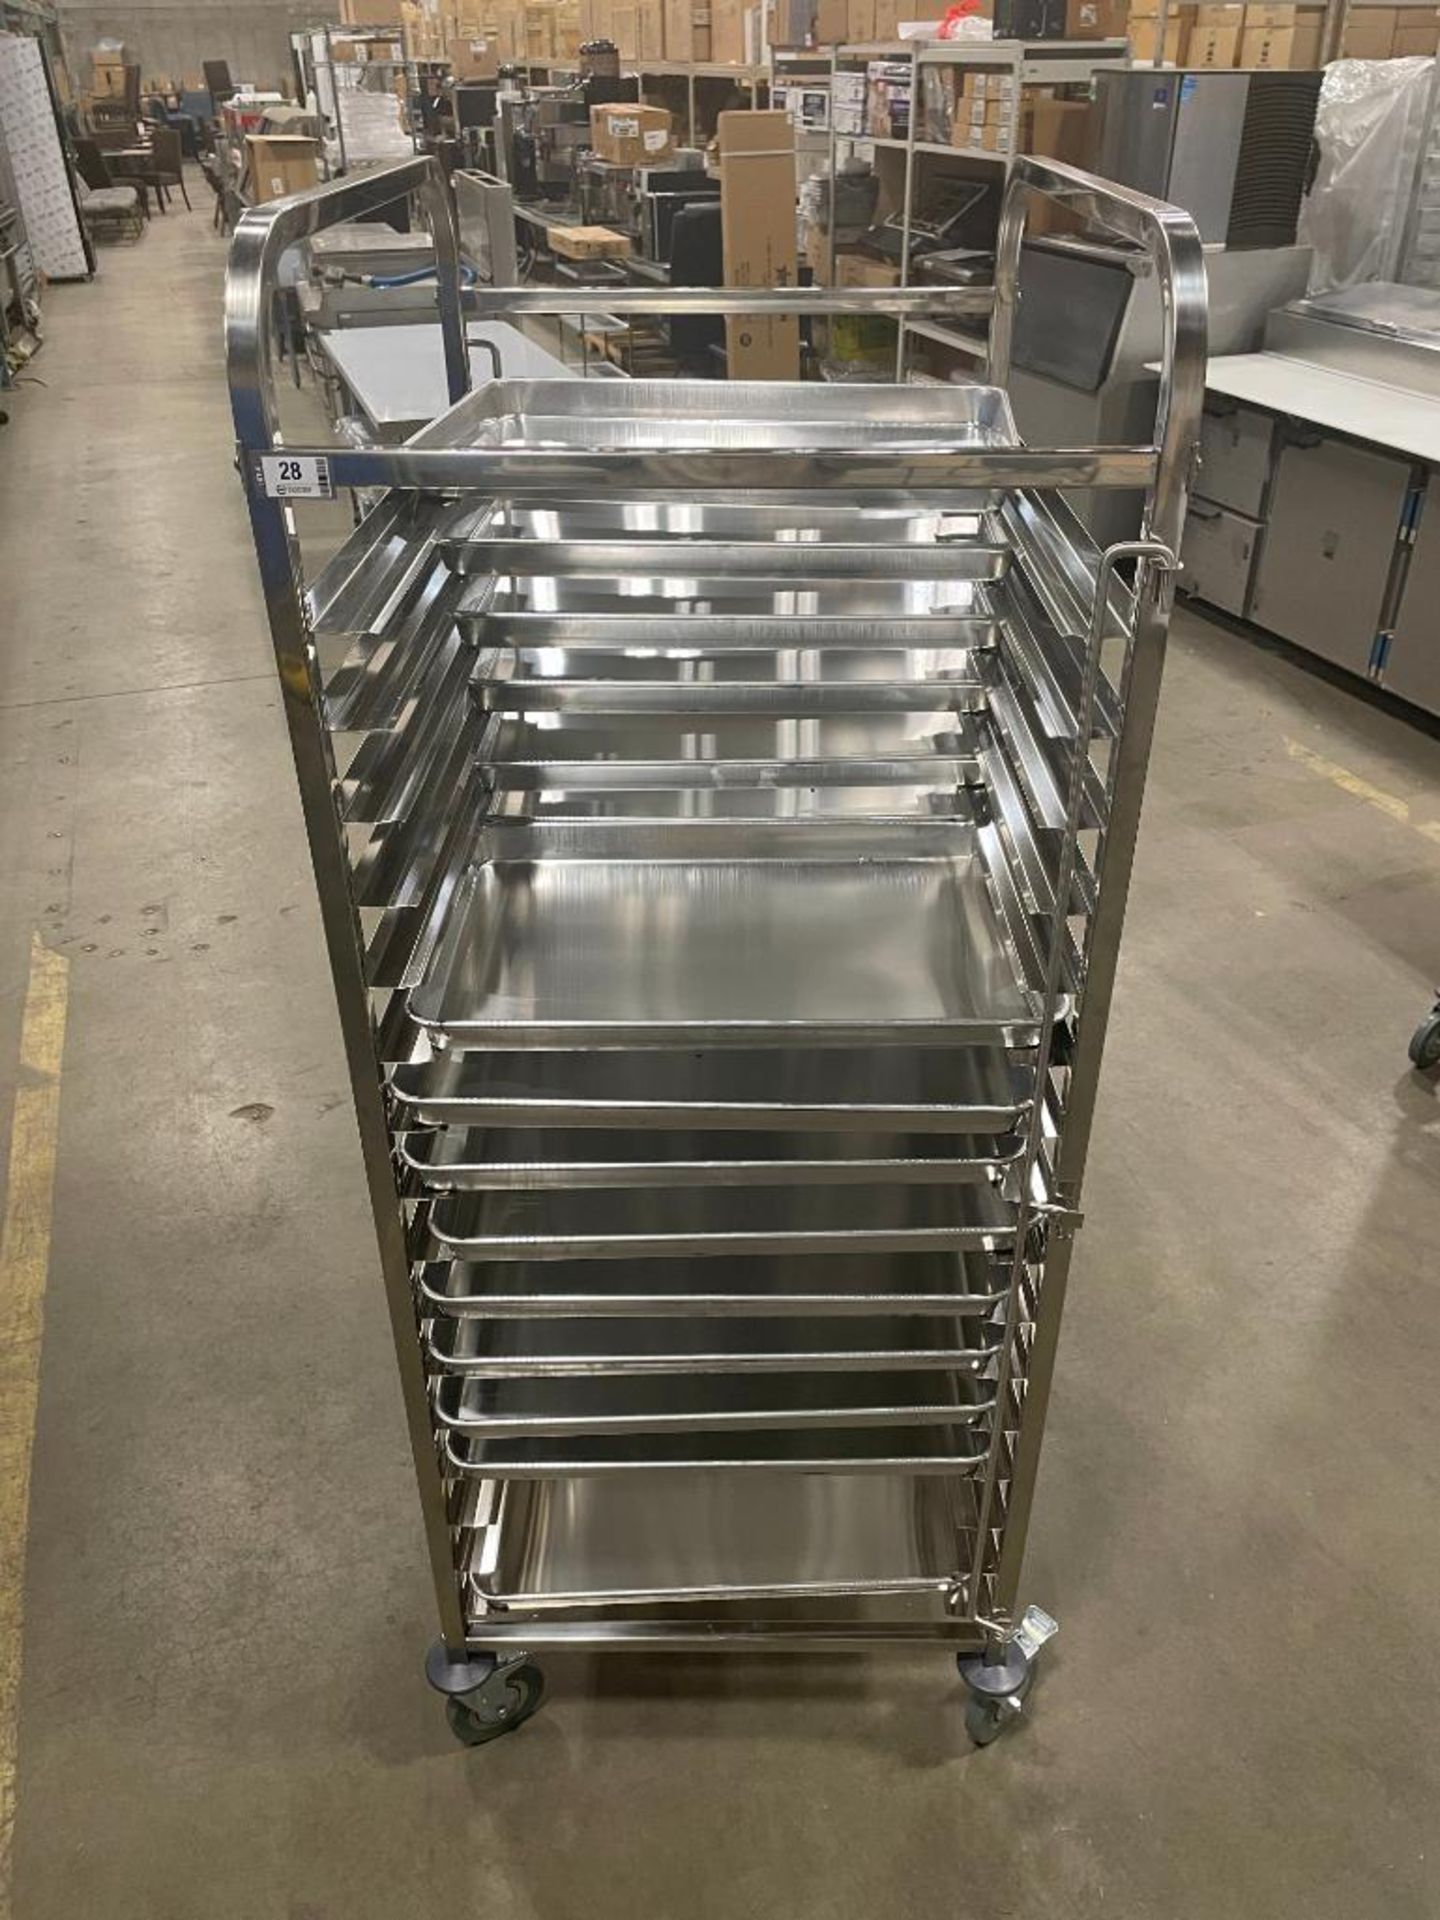 NEW STAINLESS STEEL 16-SLOT OVERSIZED BUN PAN RACK WITH PAN GUARD & (22) PANS - Image 3 of 9